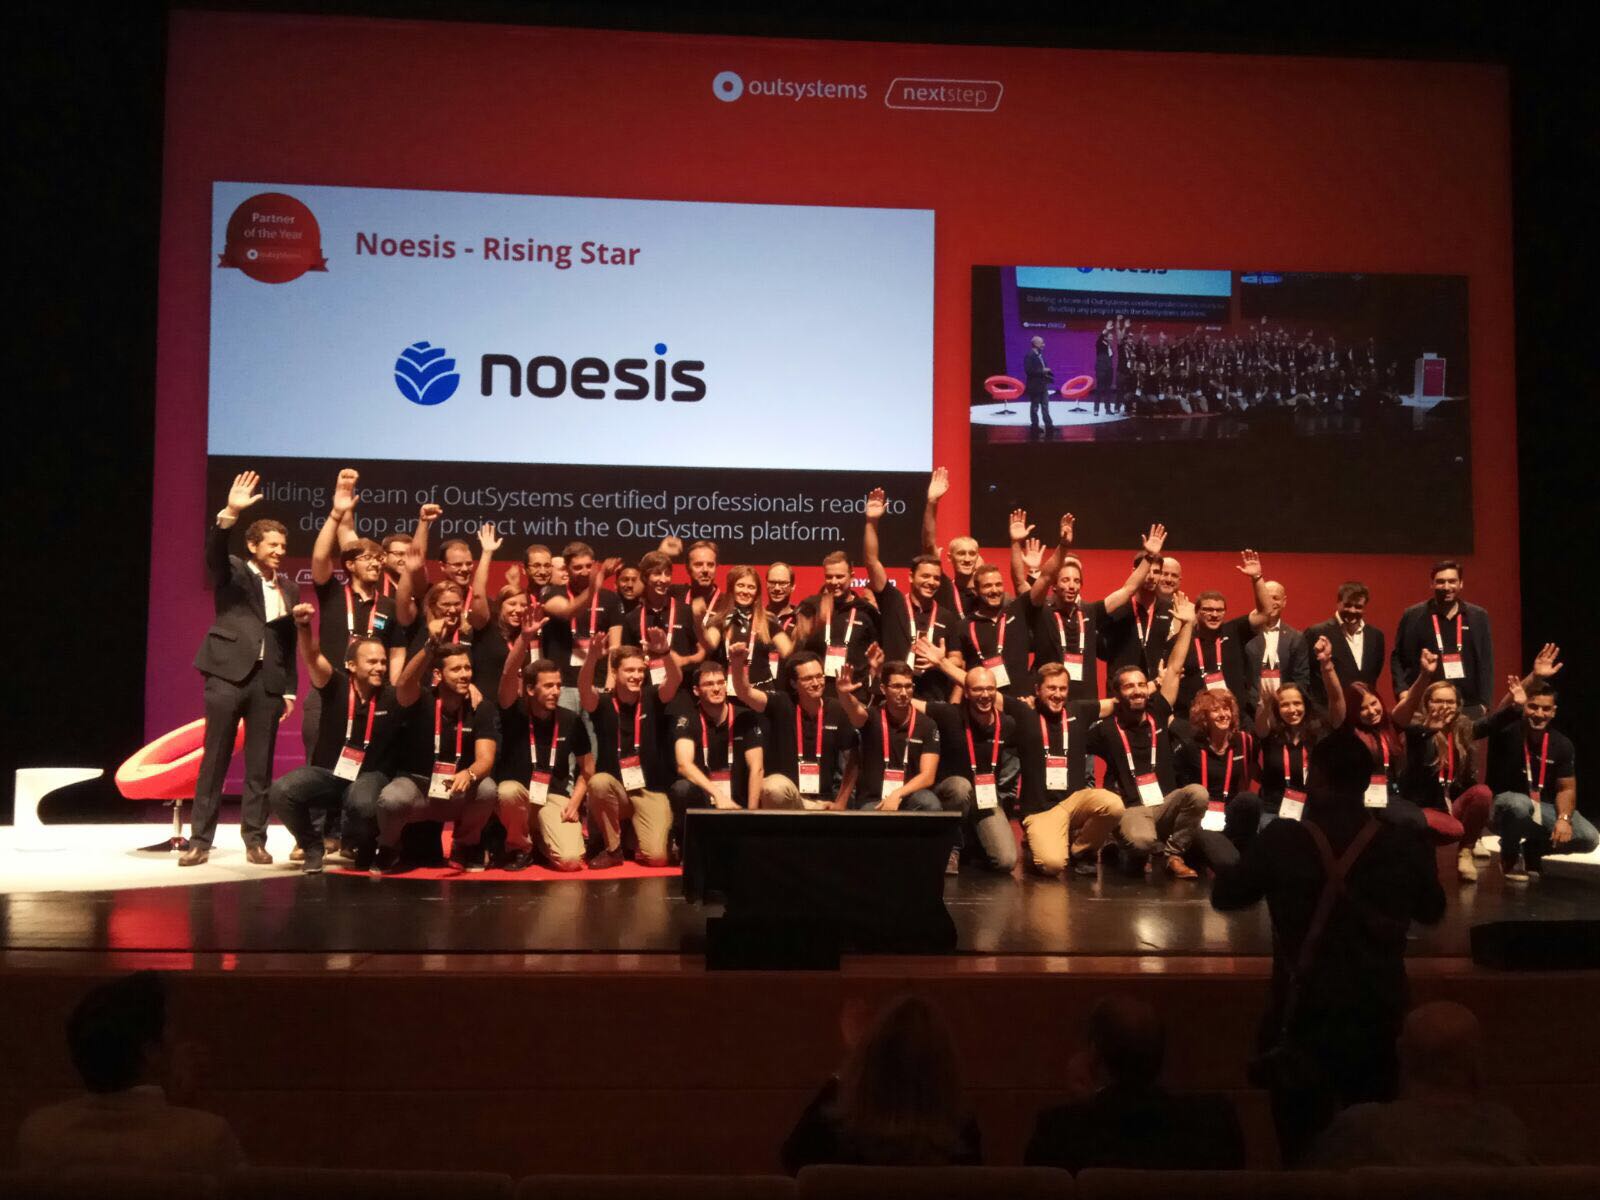 Team Noesis at OutSystems NextStep represents Specialized Team